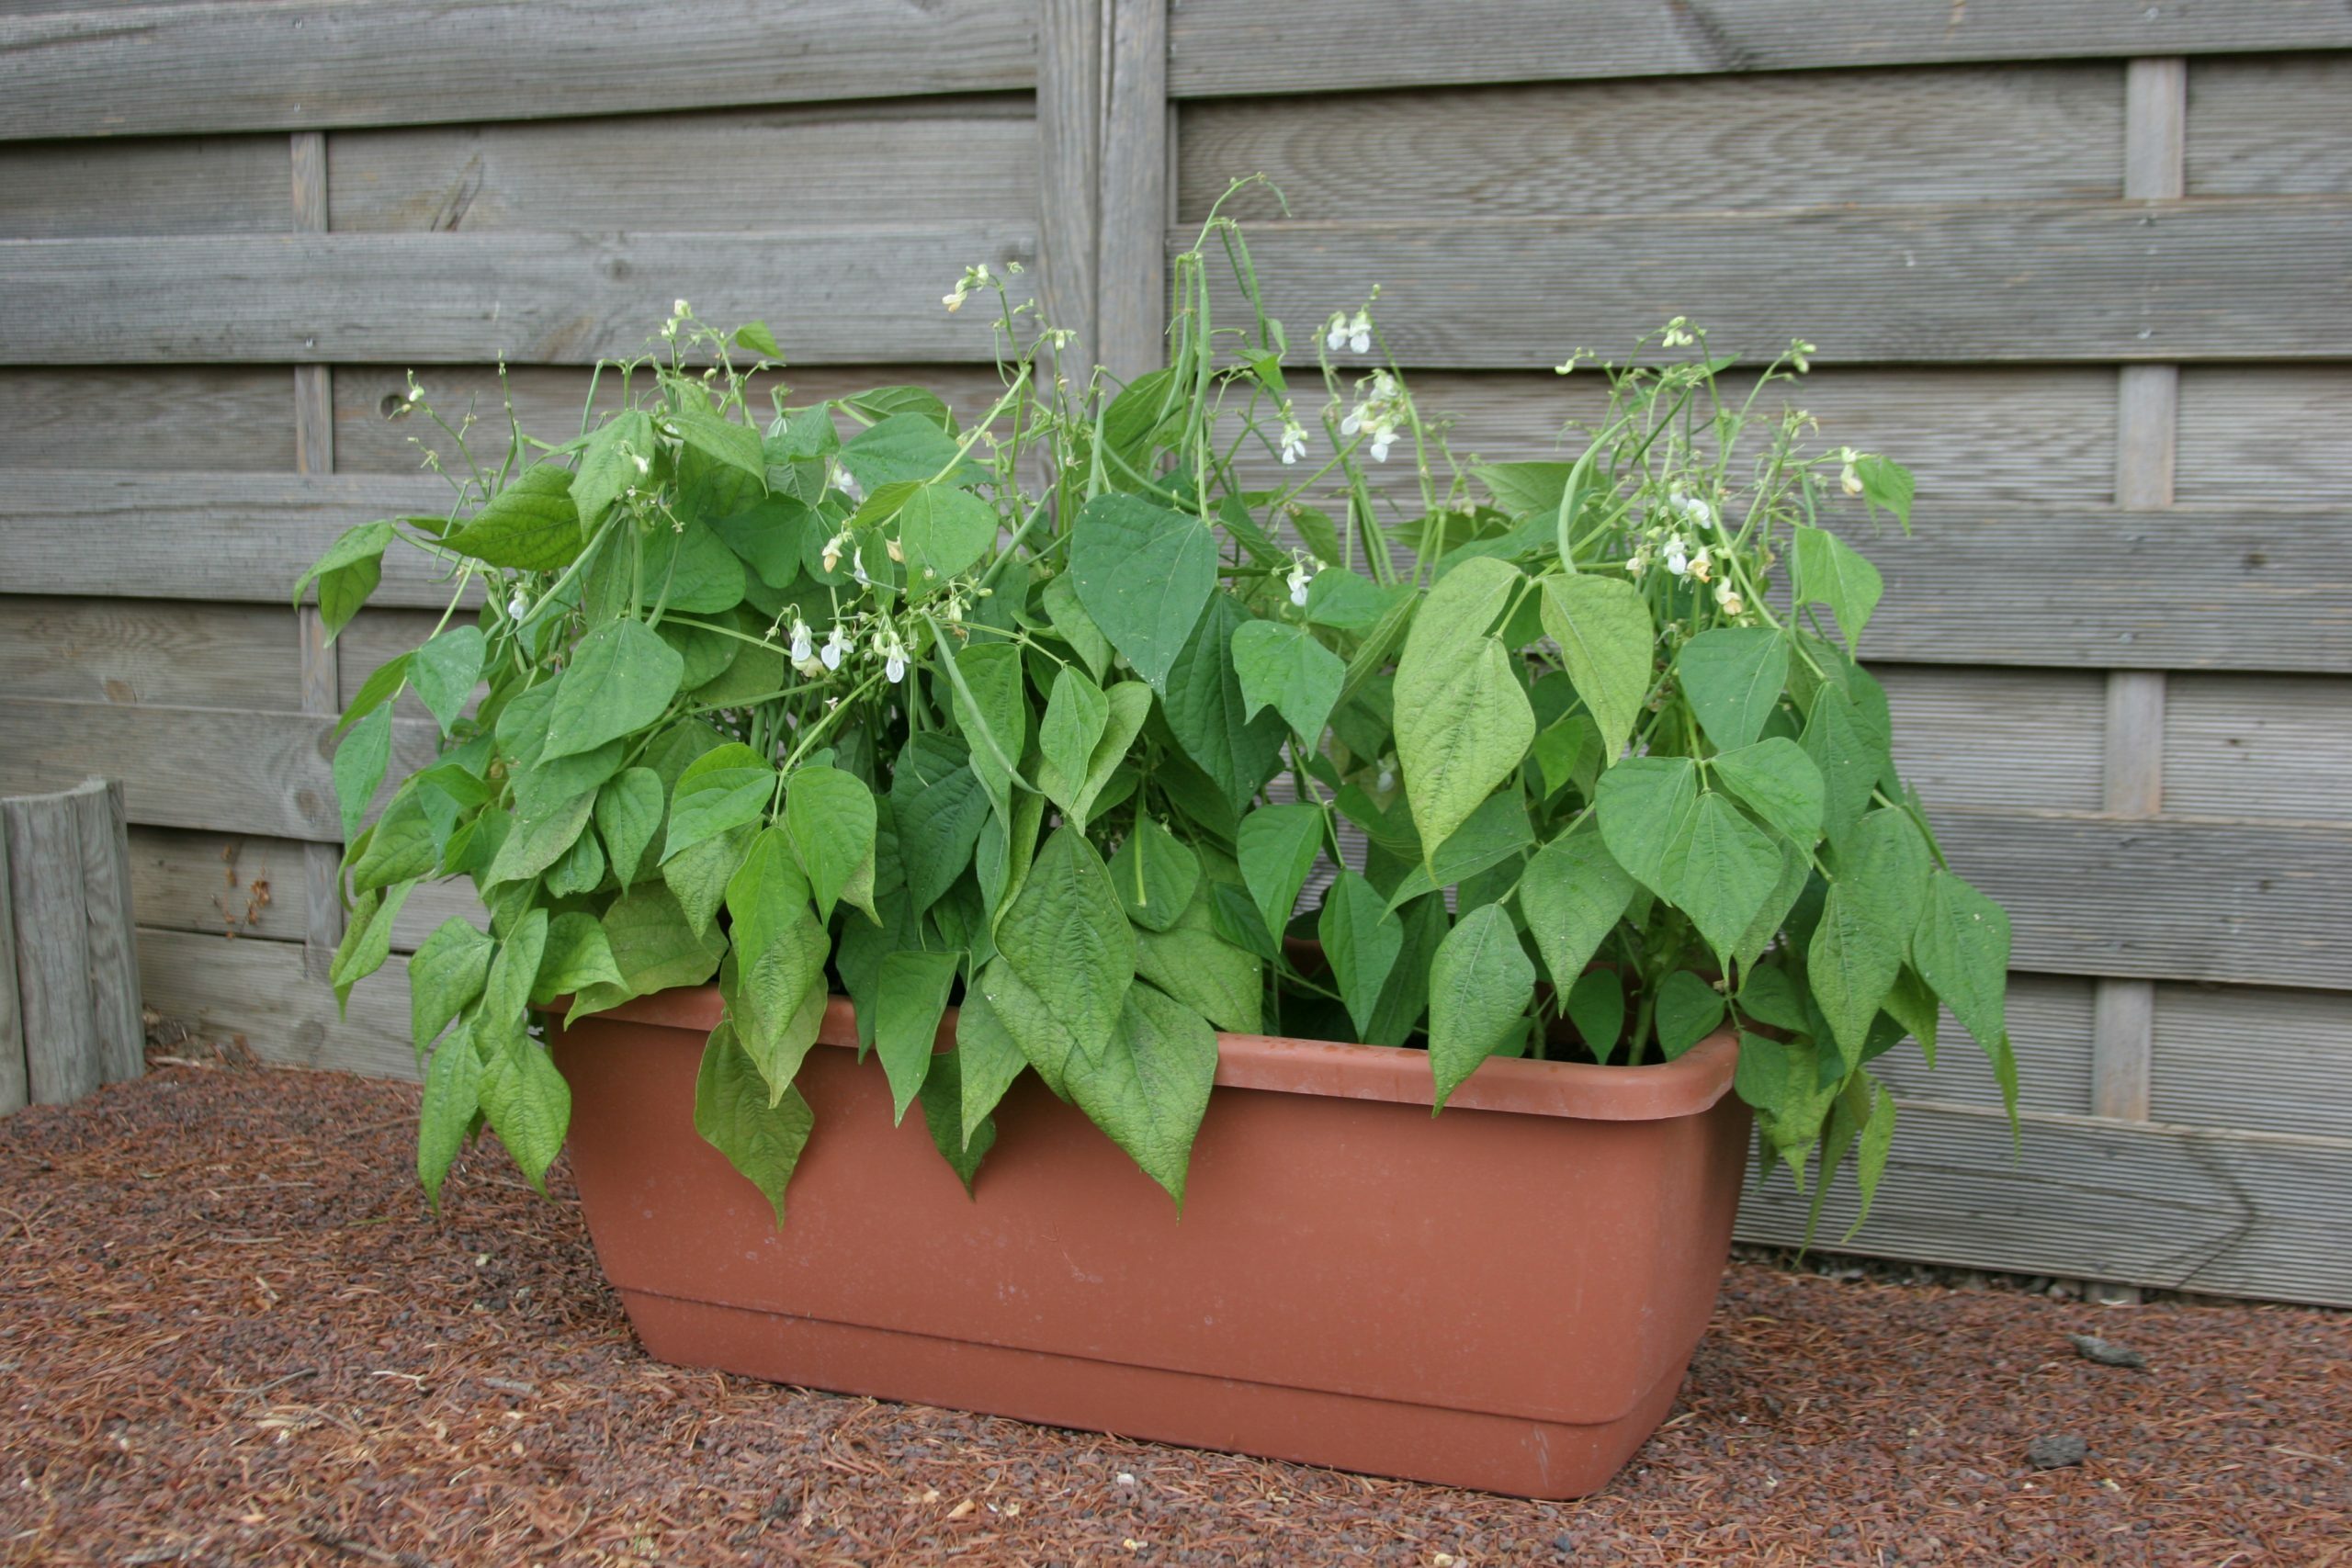 Mascotte is a fast (50 days) growing bean that provides plentiful crops on plants that are container friendly. This bush-type grows 15 inches tall with large white blooms that result in tender, stringless beans.